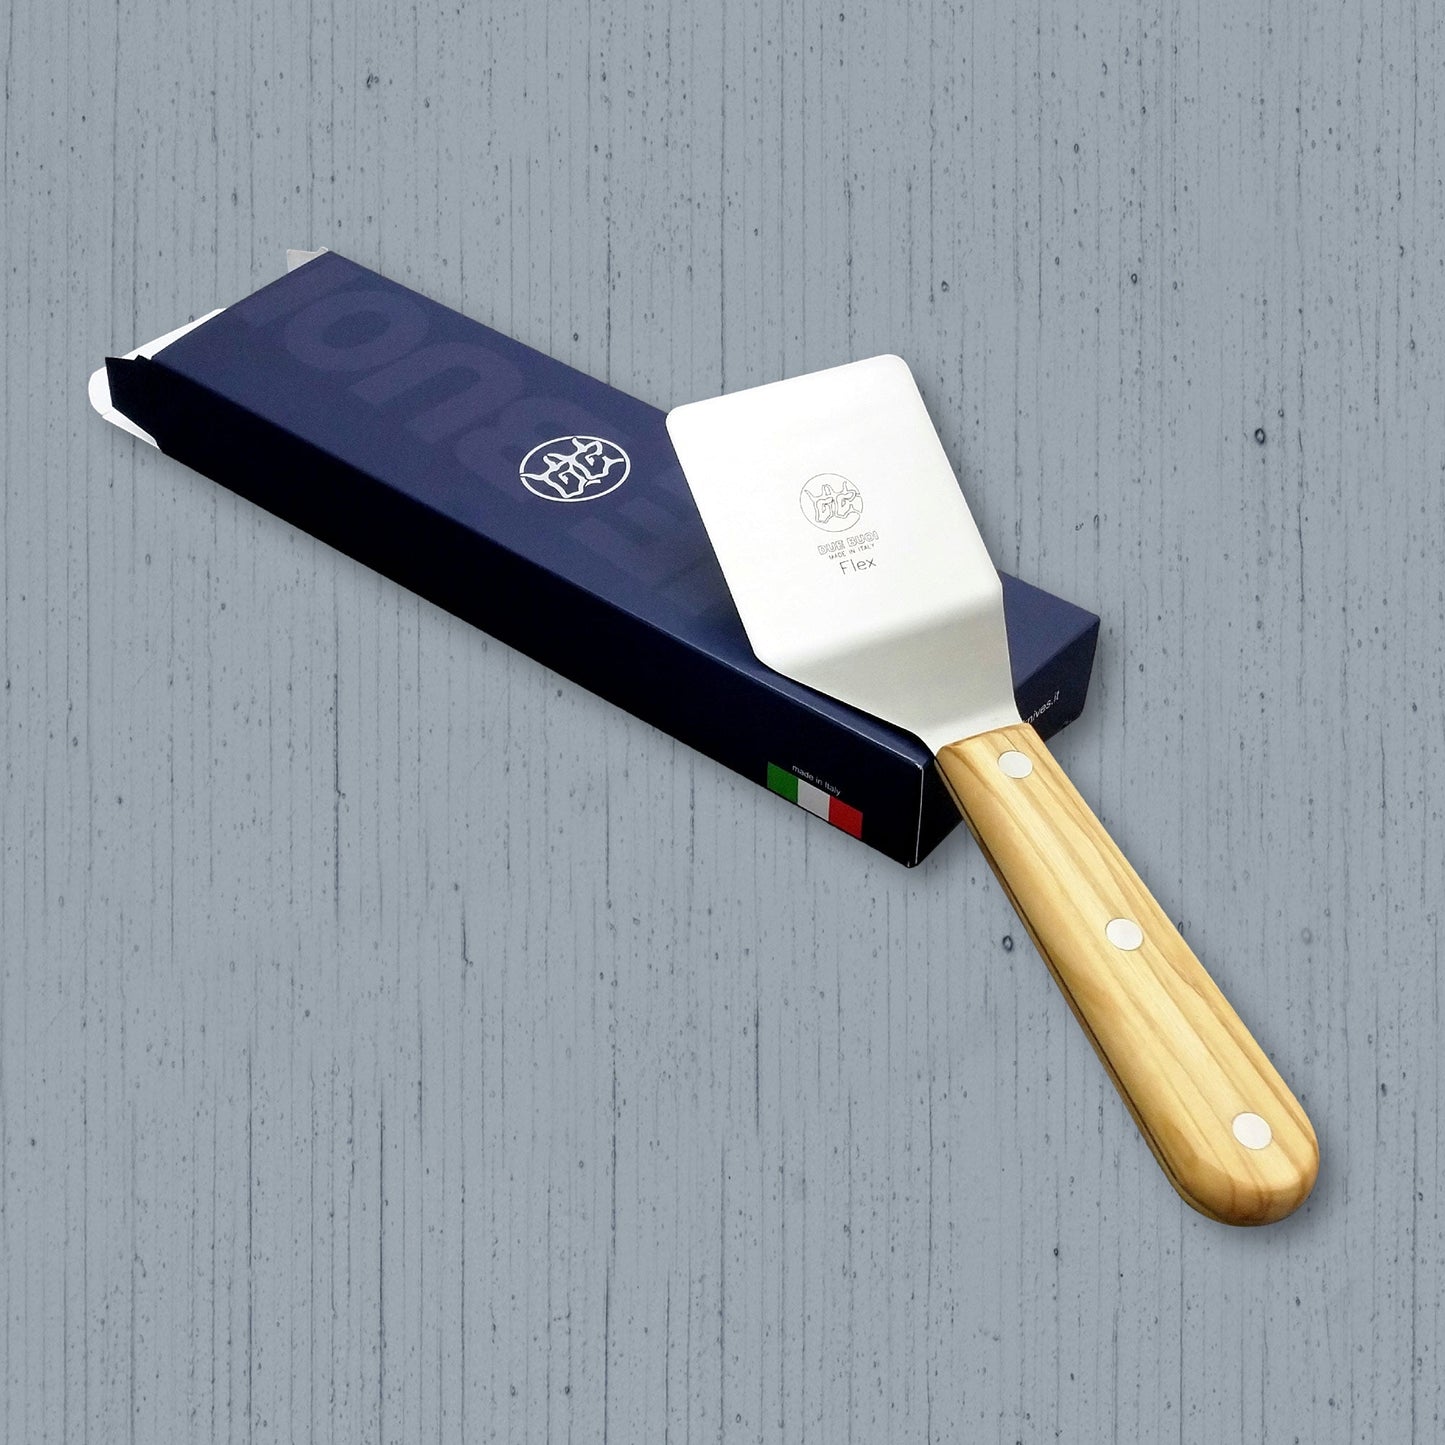 White Small Offset Spatula - The Peppermill